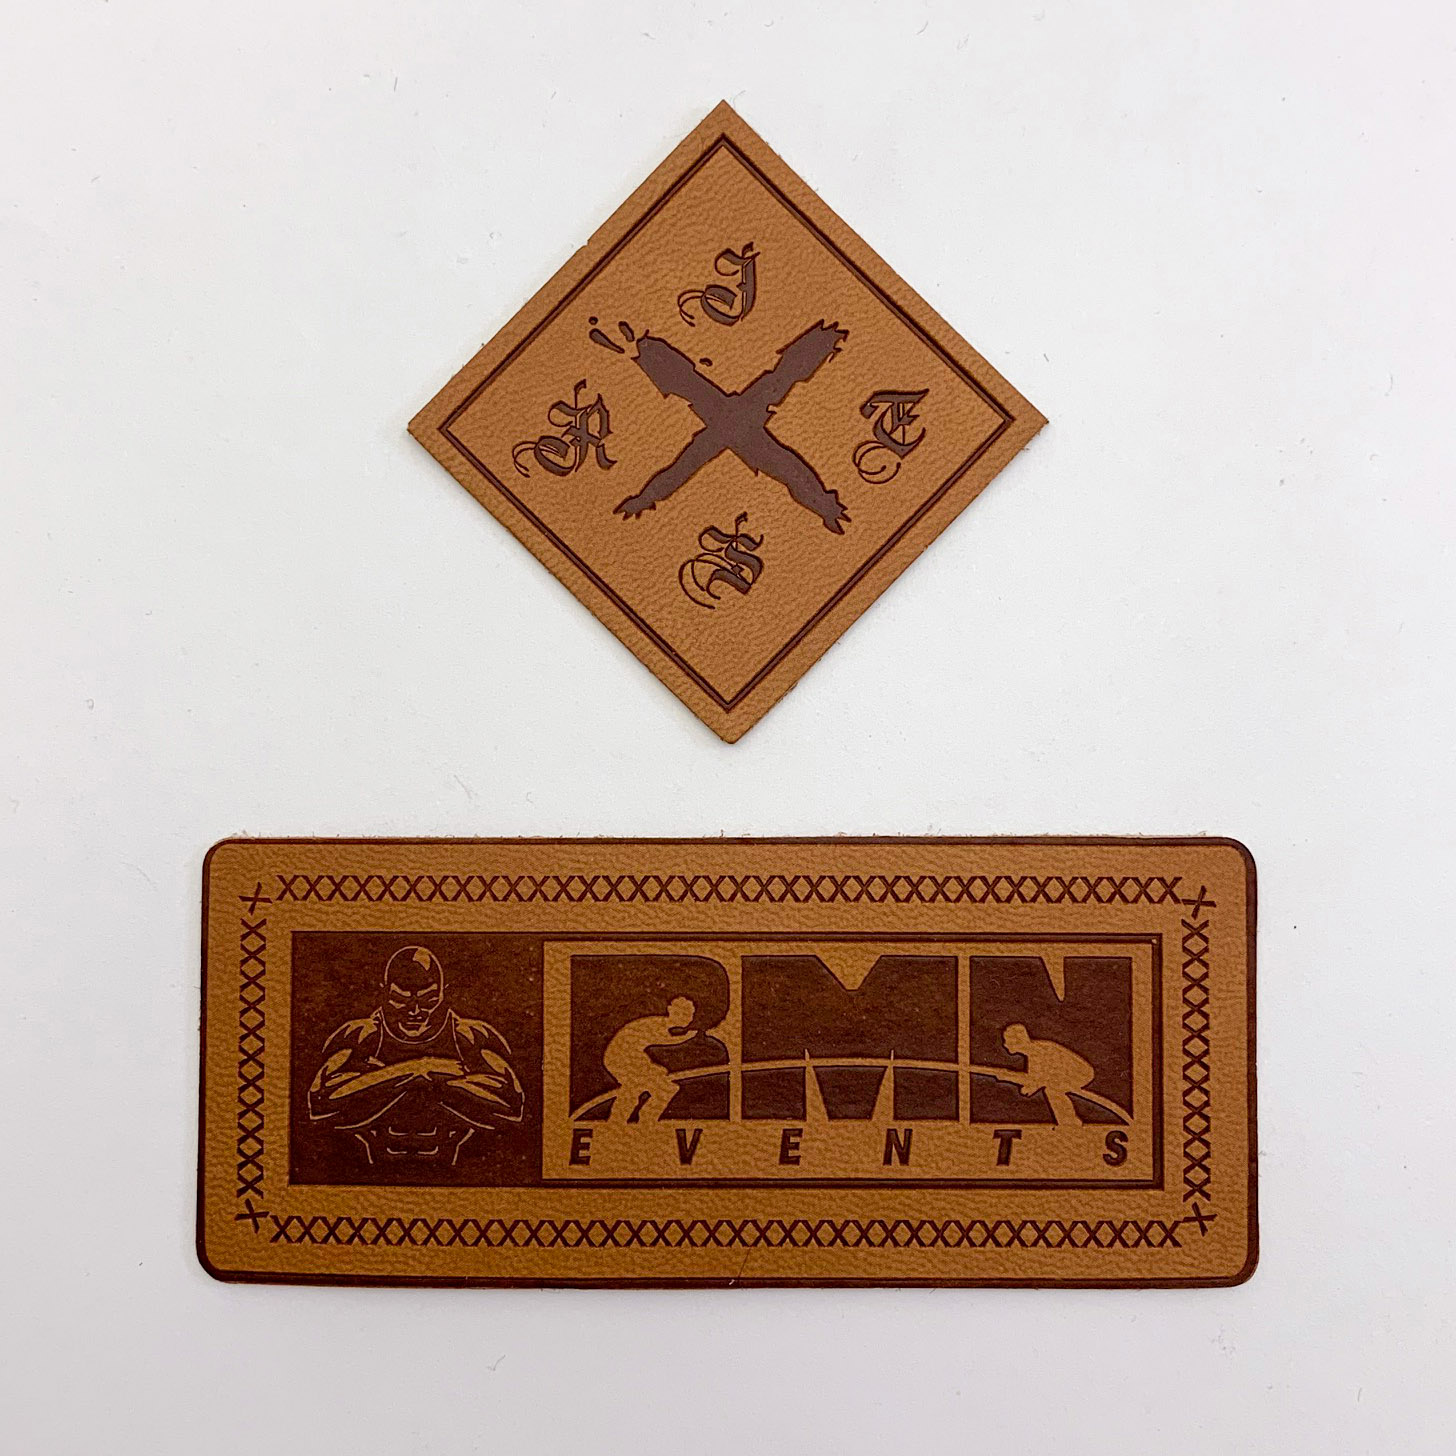 Leather Patches - Custom Patches - Made To Your Design